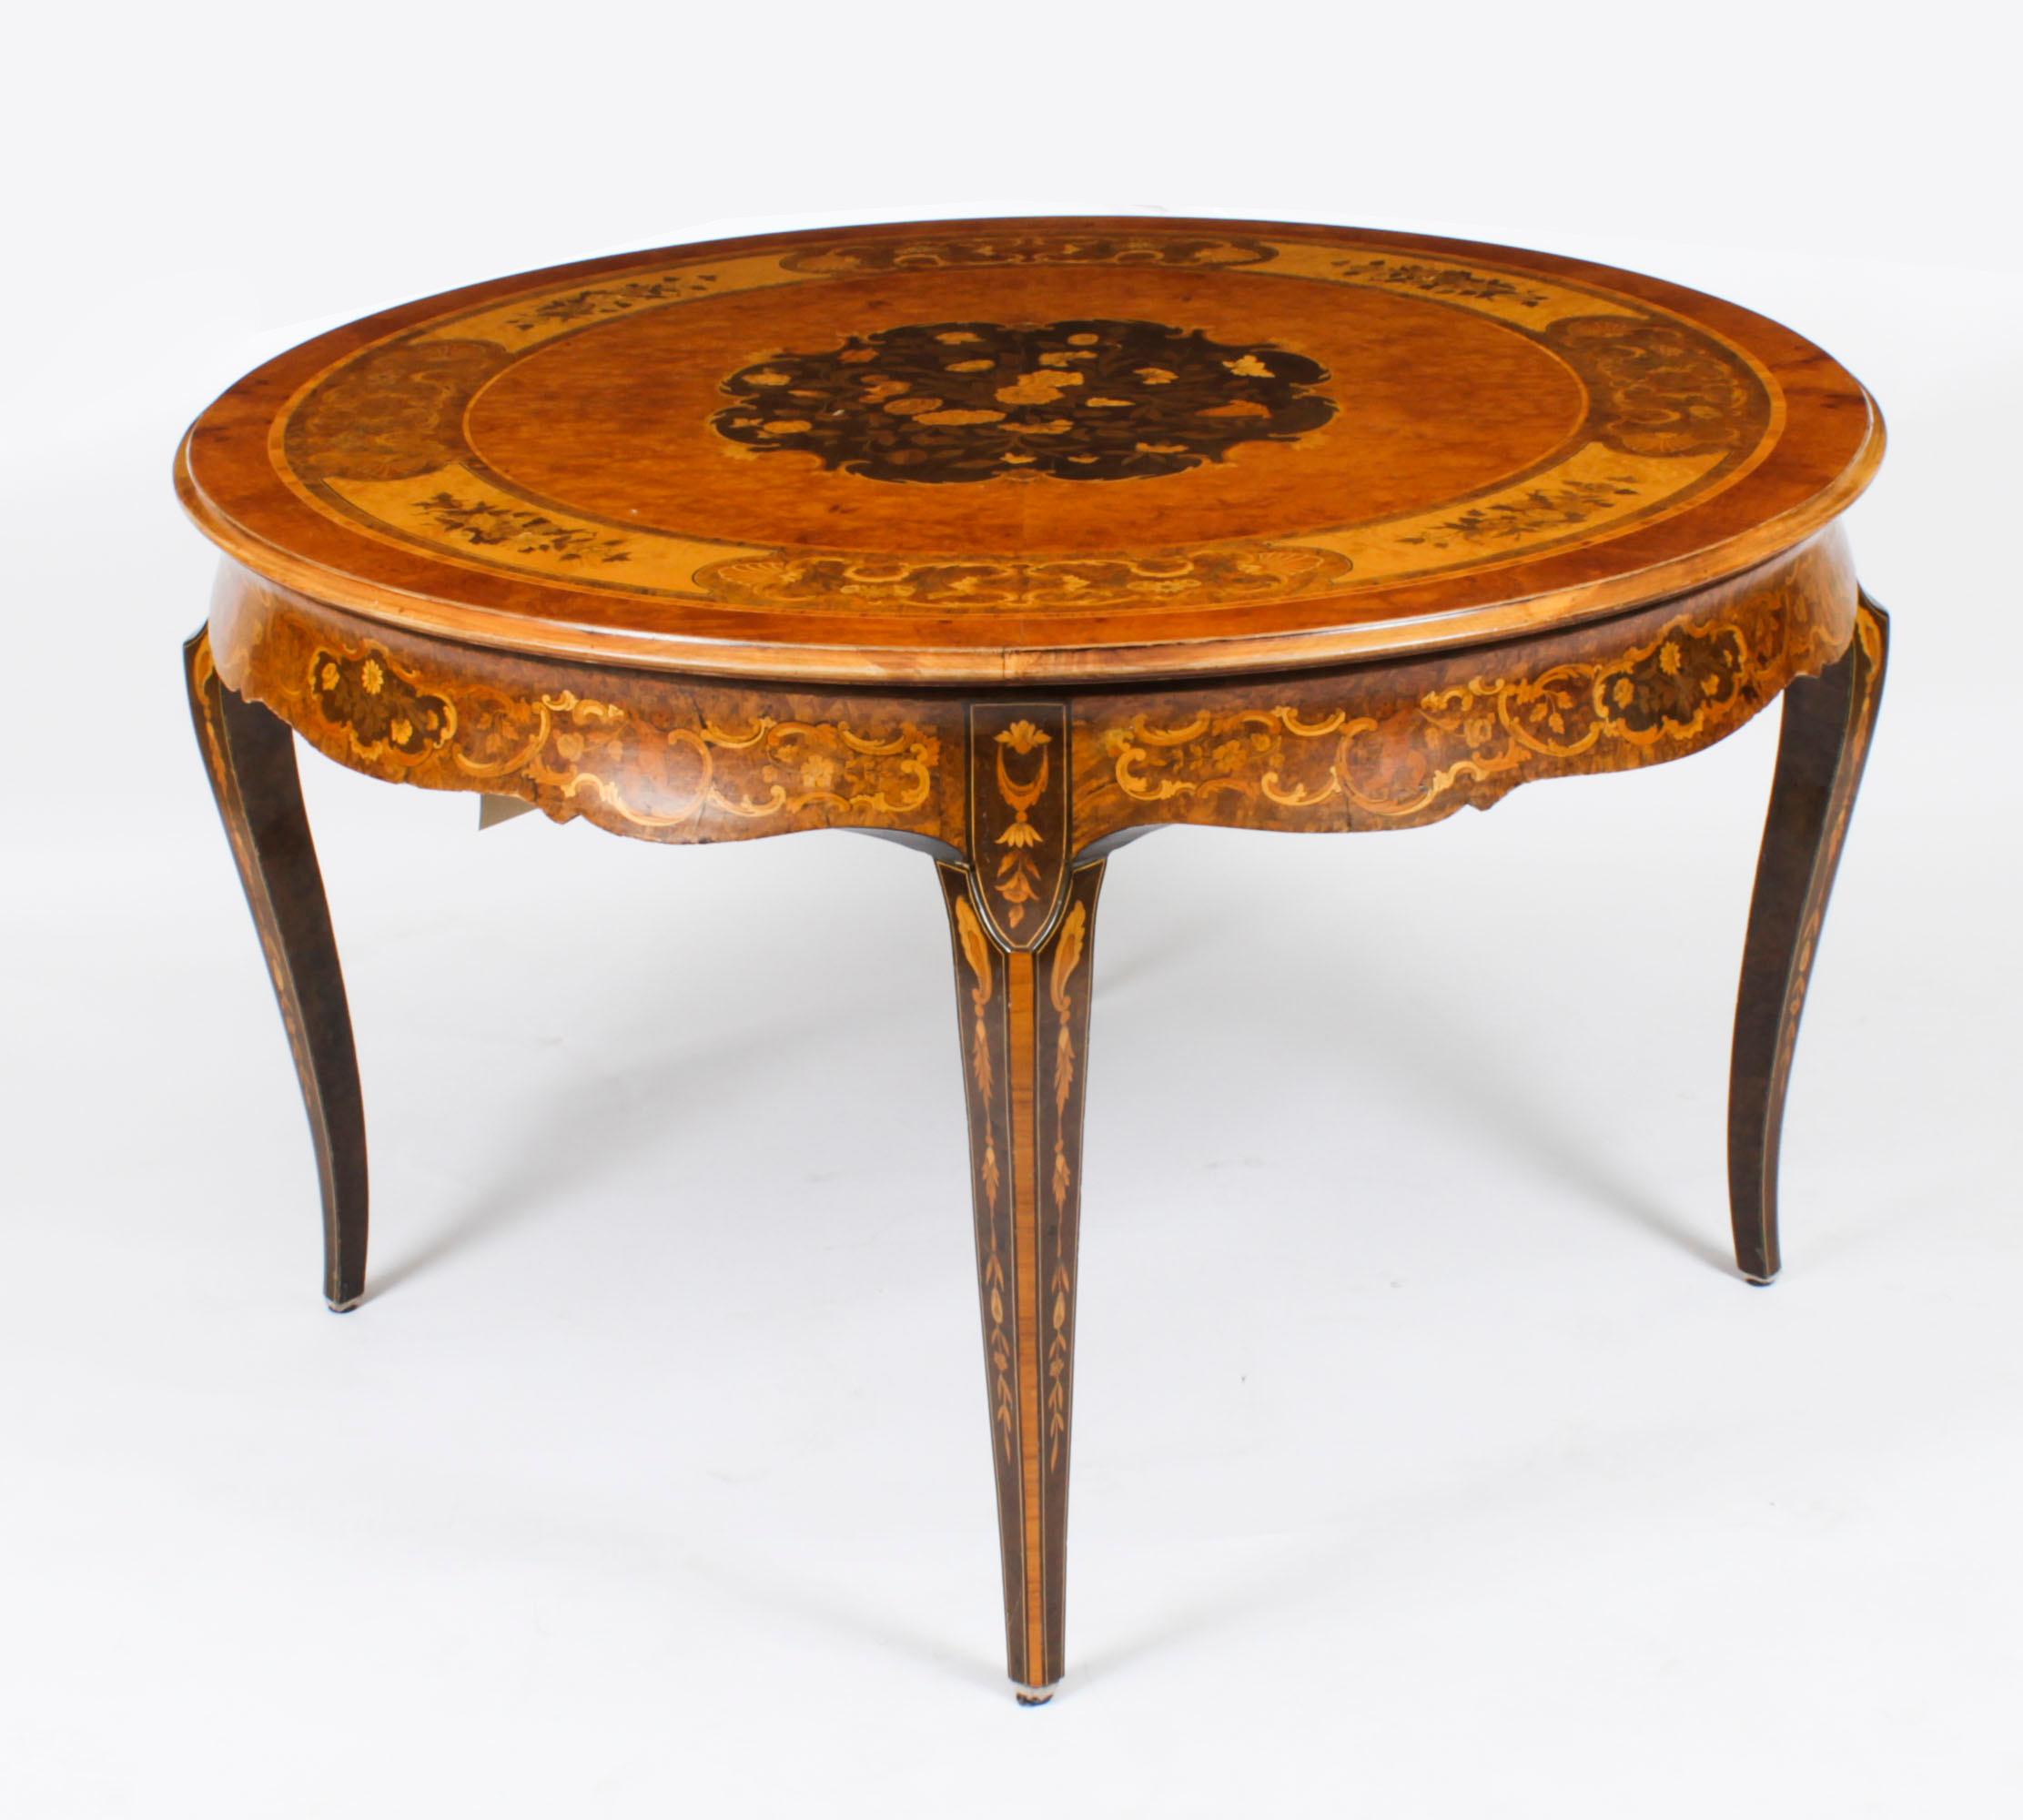 This is a lovely antique Victorian burr walnut and marquetry centre table, circa 1900 in date
 
The circular 4ft diameter table top features superb inlaid scrolling floral marquetry decoration on a stunning burr walnut ground, with a cross-banded